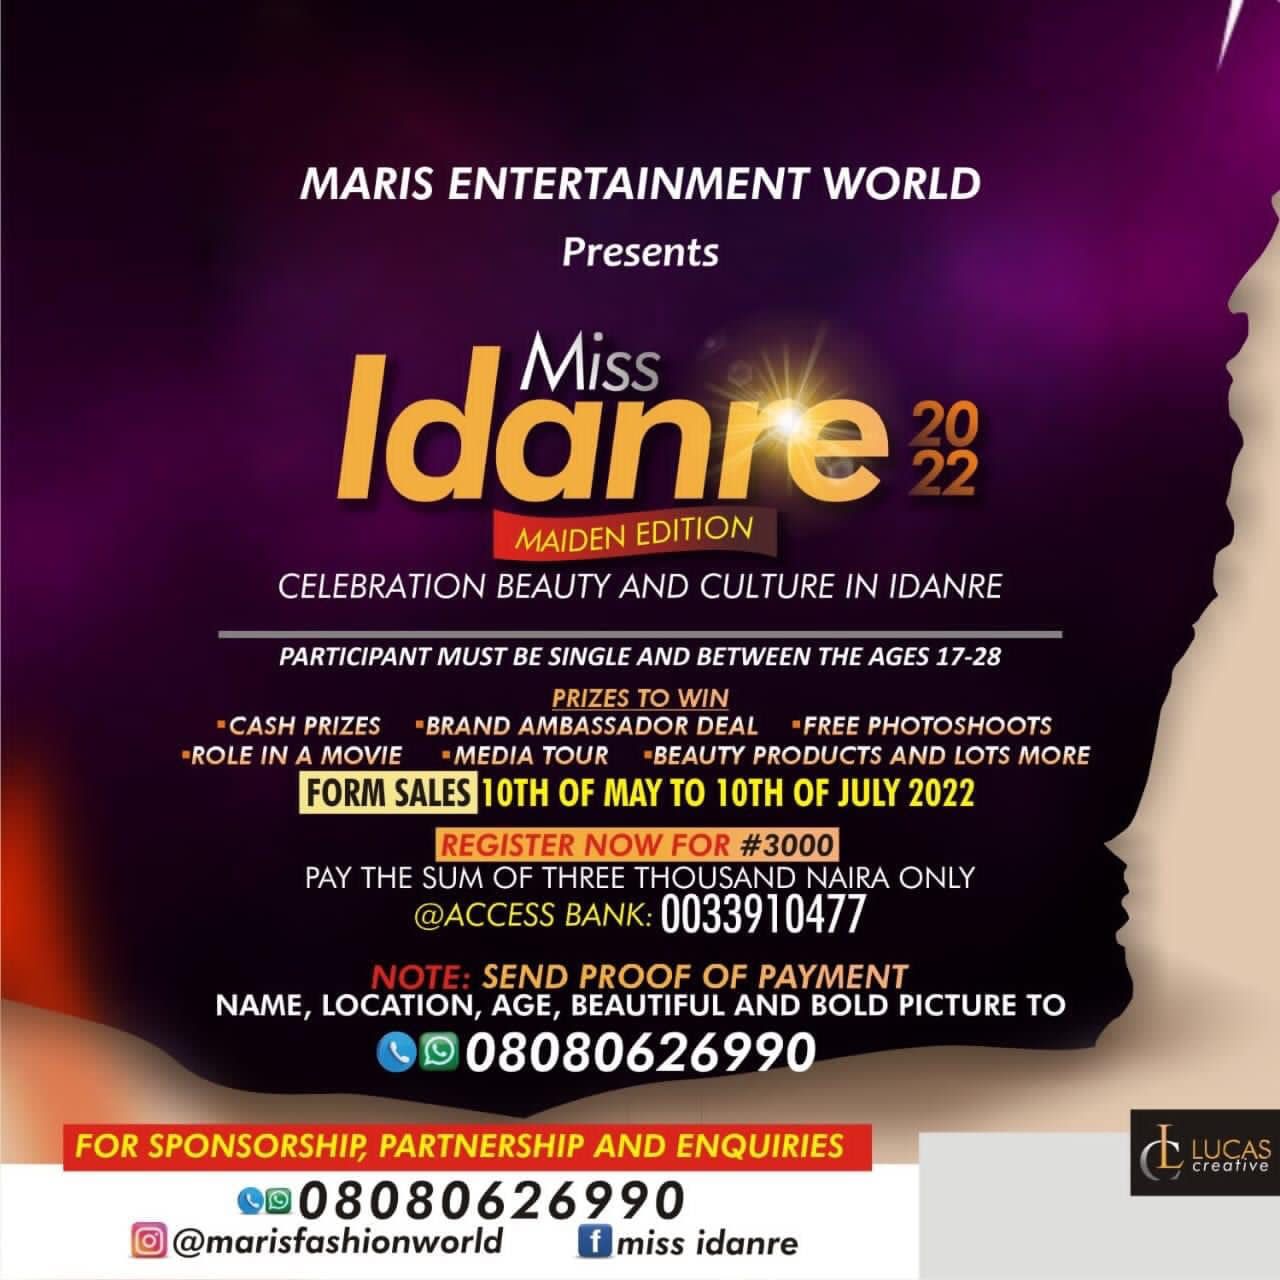 Maris Entertainment World In Conjunction With VAM Presents Pageantry In Idanre (How To Register)